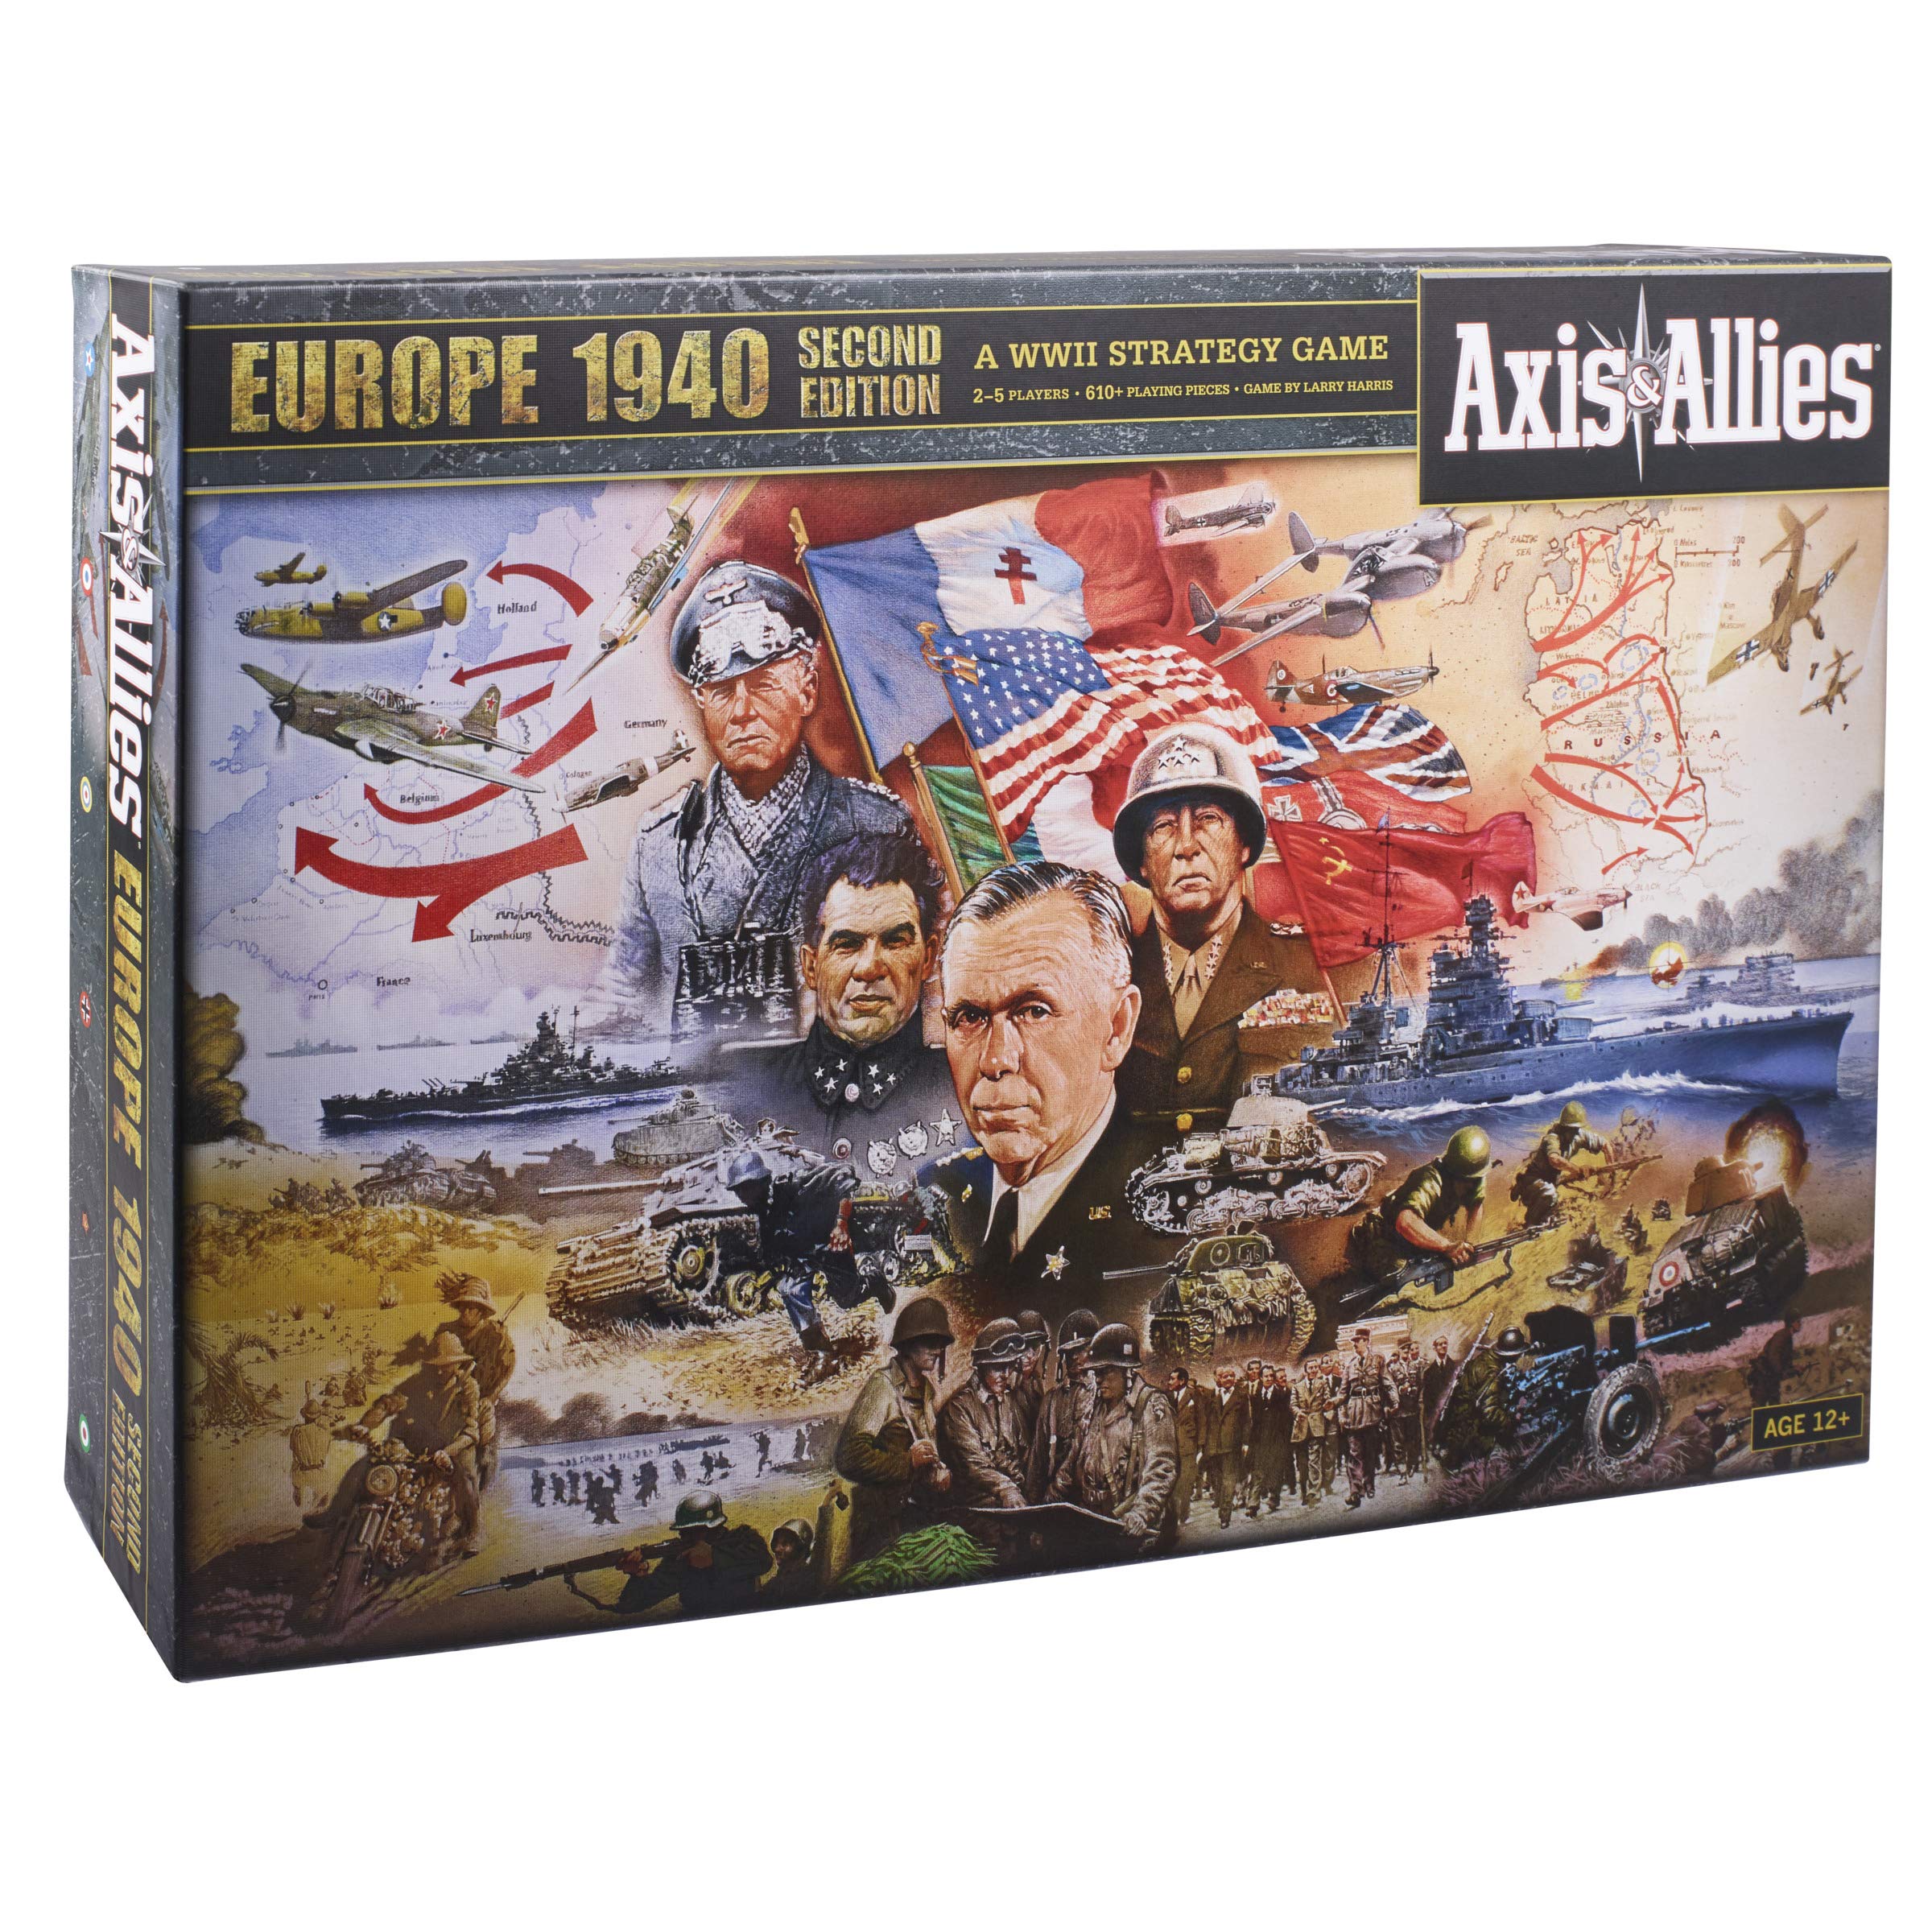 Hasbro Gaming Avalon Hill Axis & Allies Europe 1940 Second Edition WWII Strategy Board Game, with Extra Large Gameboard, Ages 12 and Up, 2-6 Players, Brown